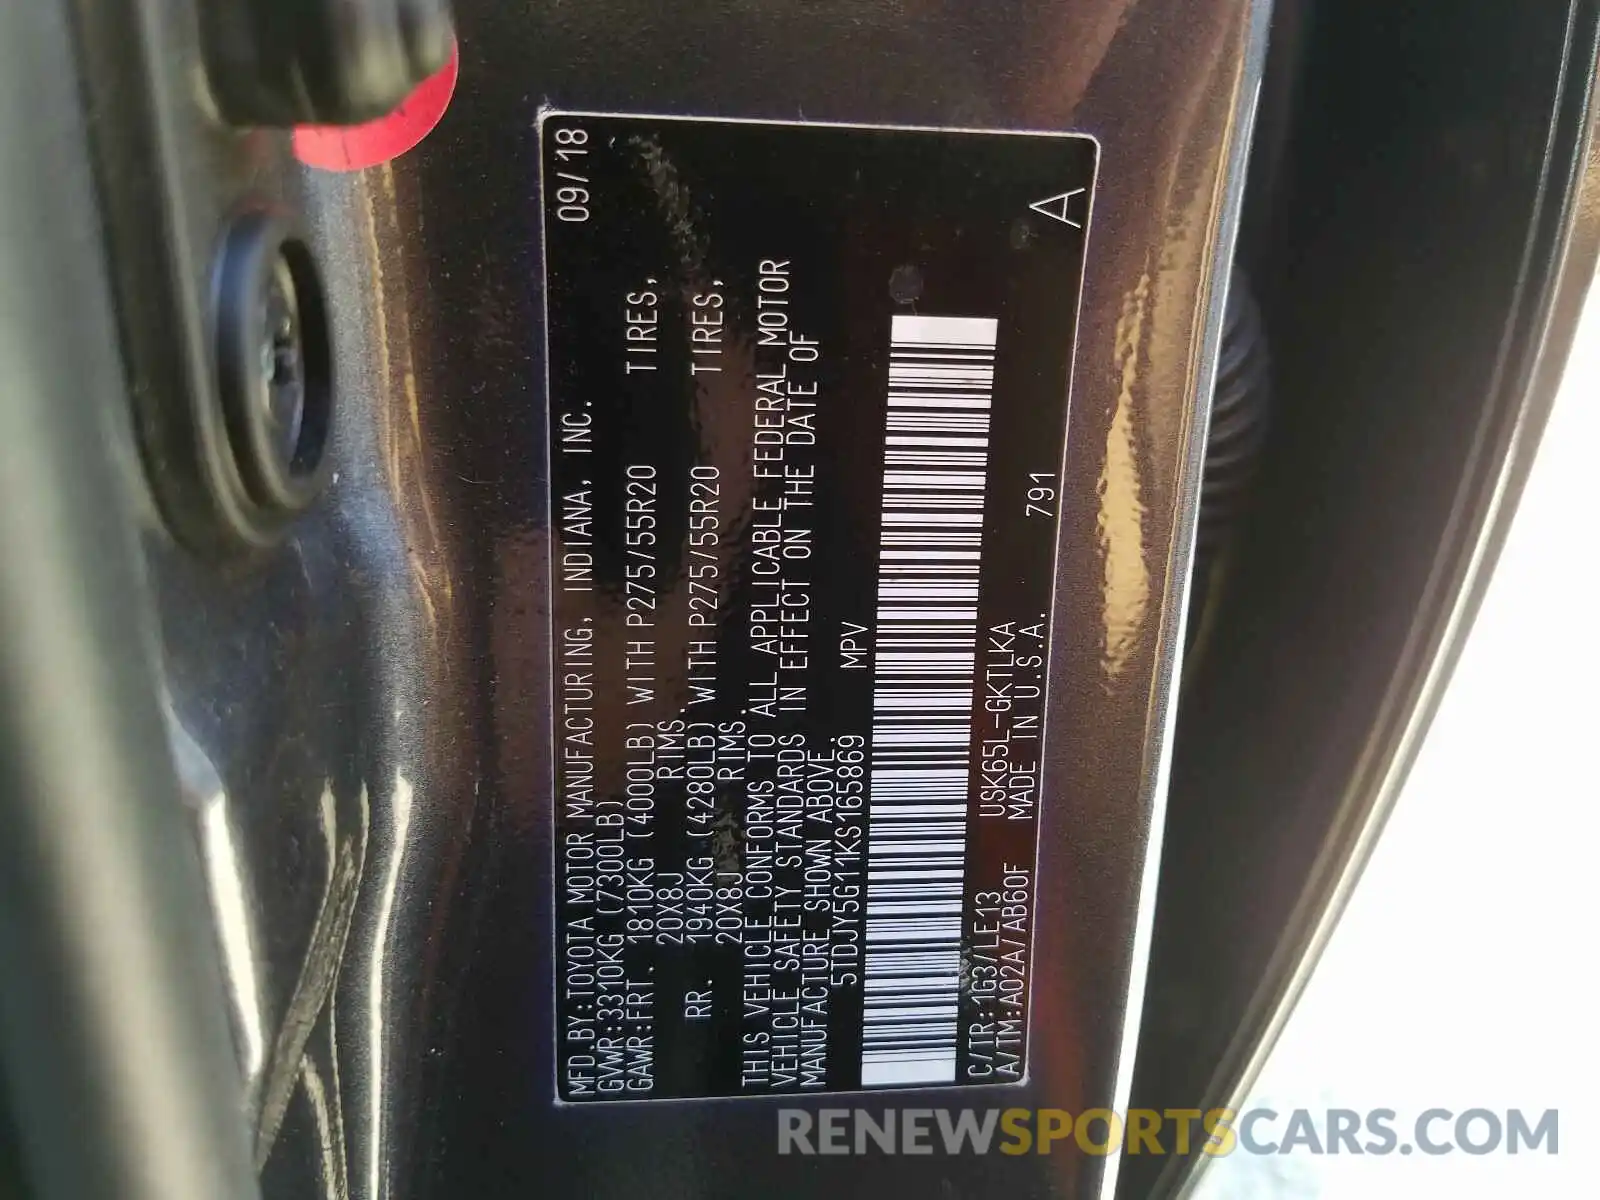 10 Photograph of a damaged car 5TDJY5G11KS165869 TOYOTA SEQUOIA 2019